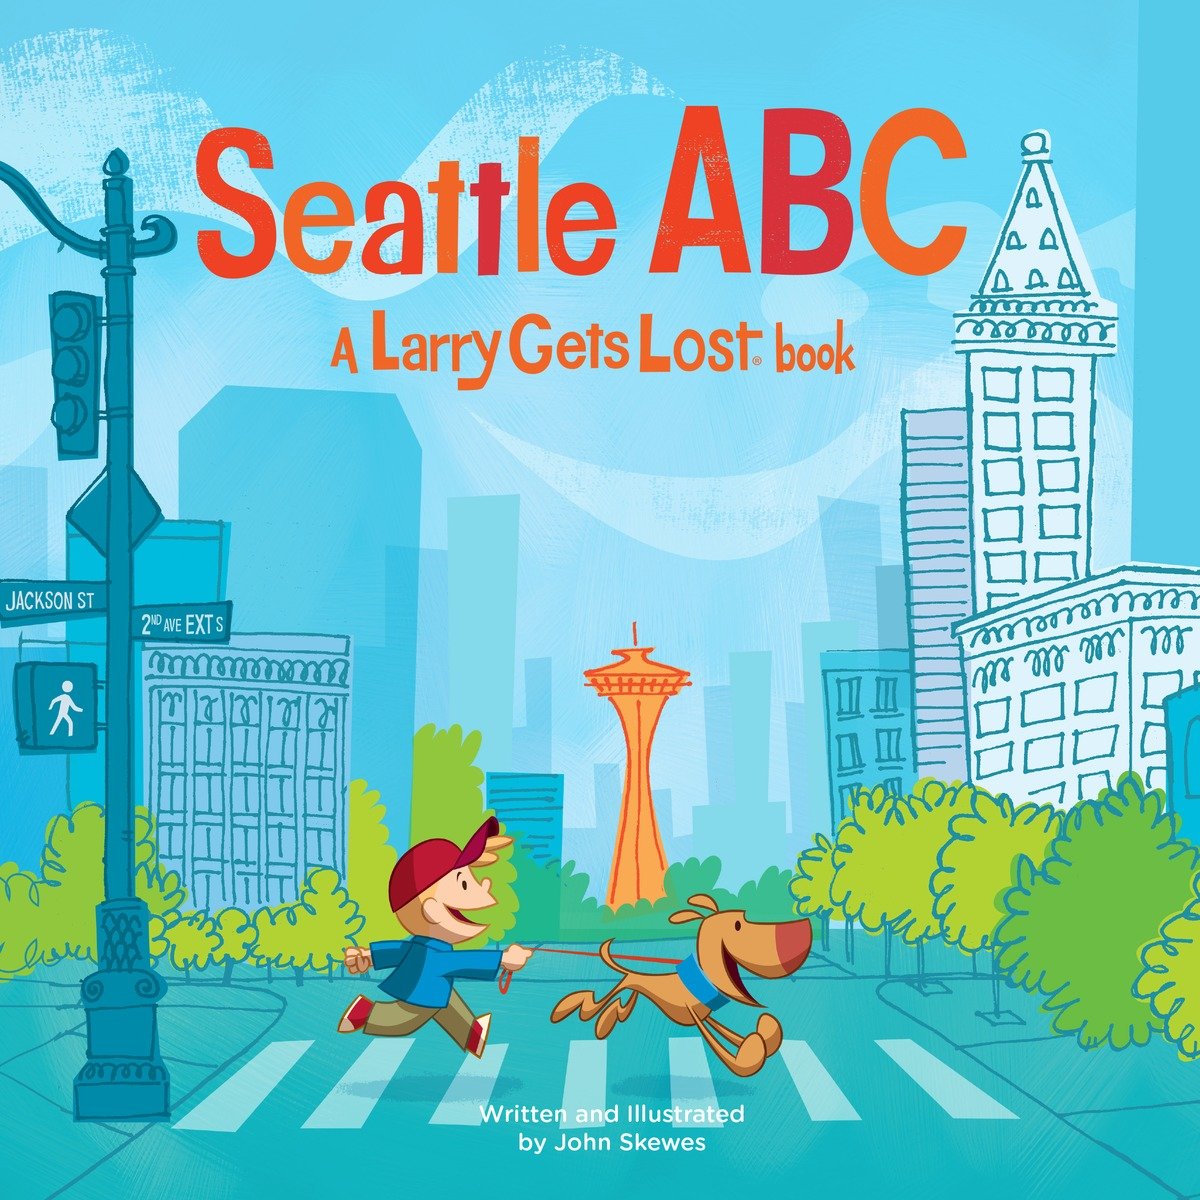 Seattle Abc: A Larry Gets Lost Book (Hardcover Book)